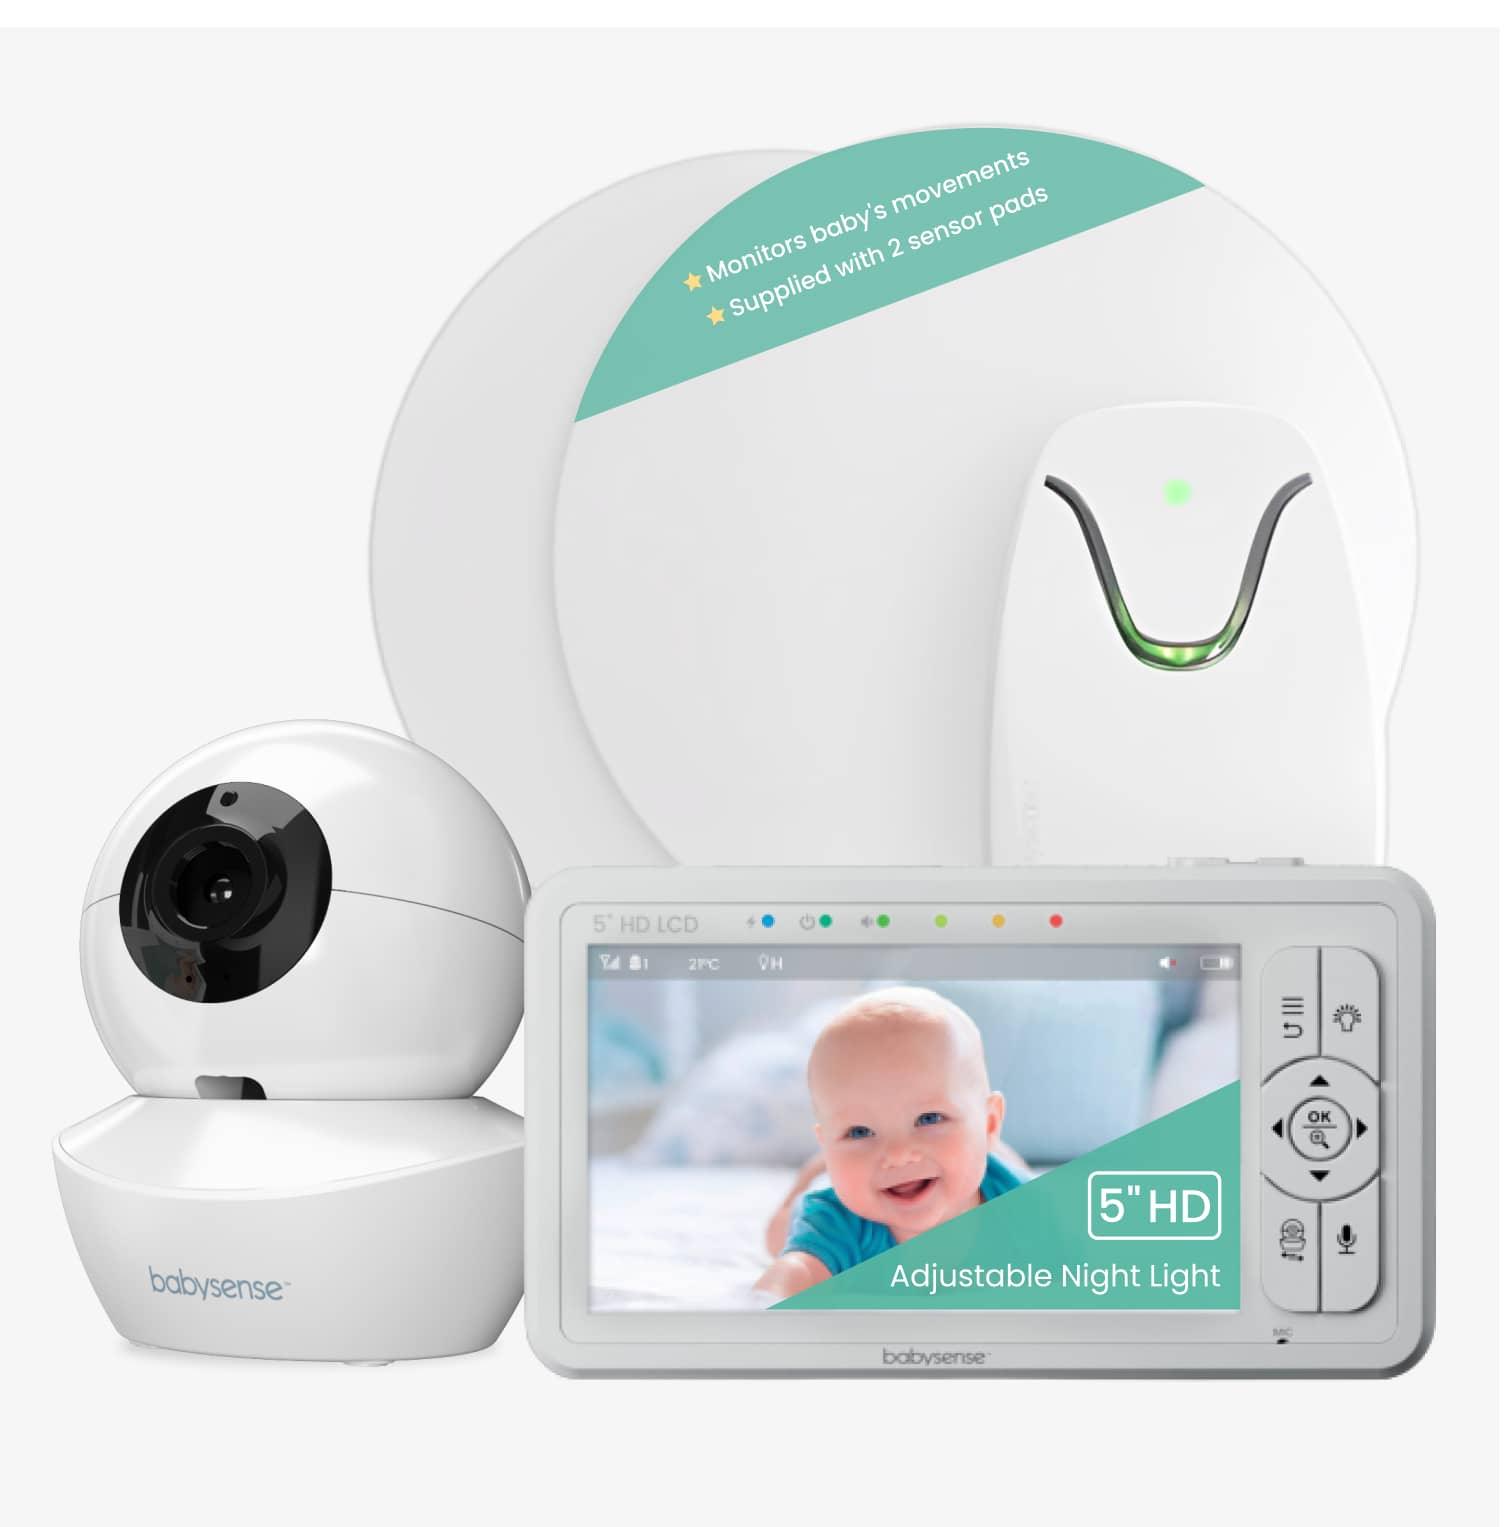 BABYSENSE V24R+2 Compact Video Baby Monitor with 2 Cameras